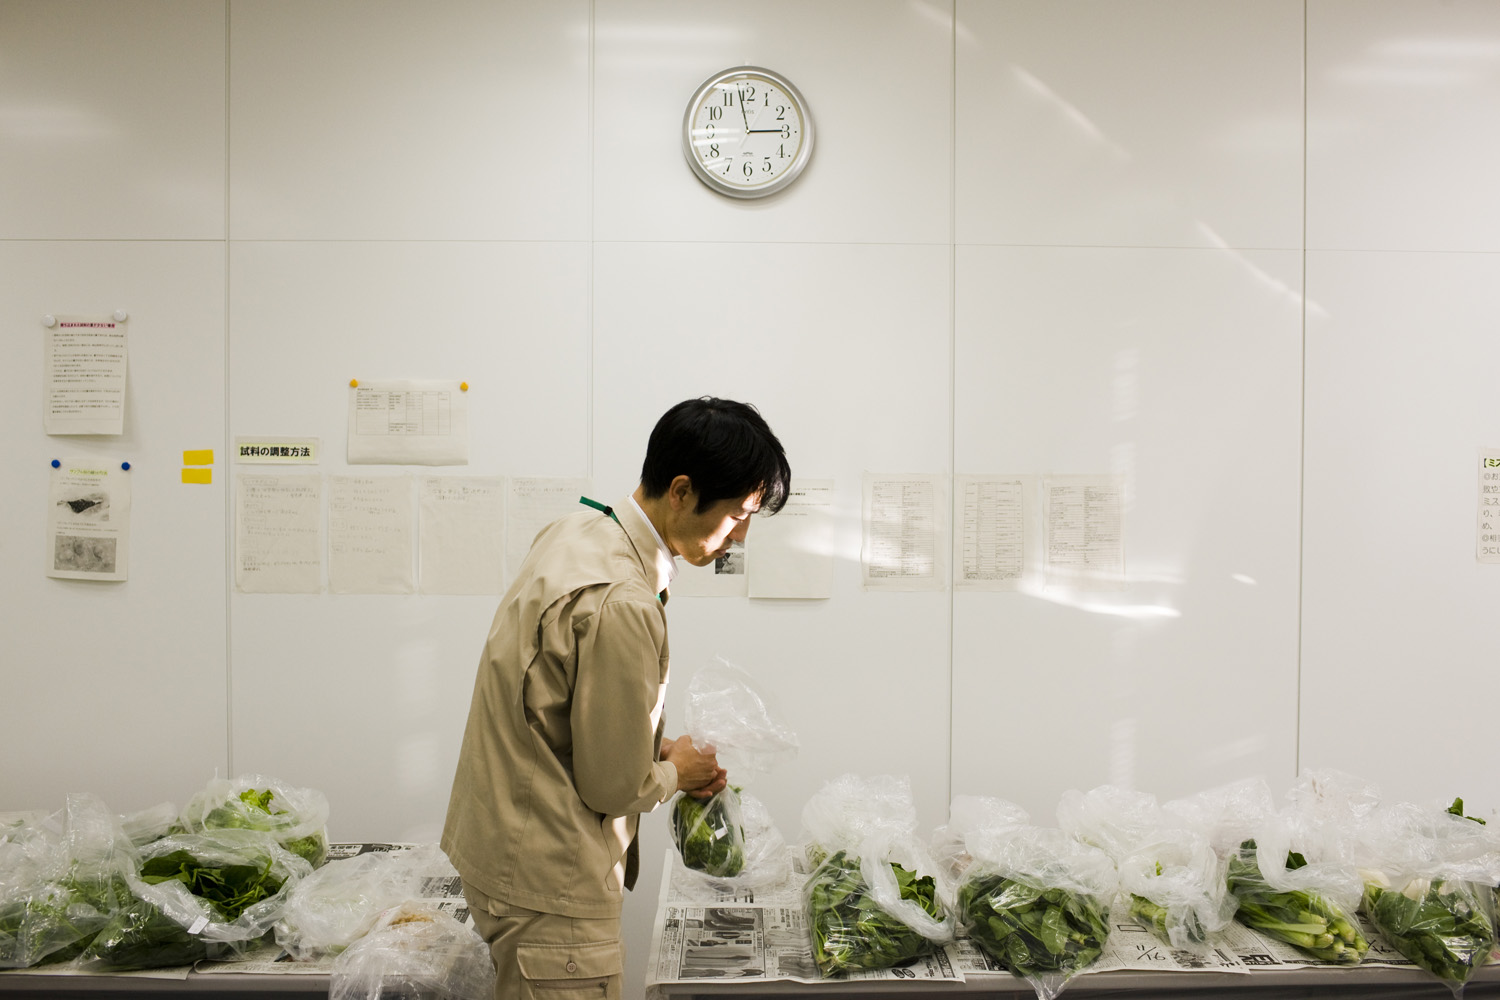 Japan, Koriyama, 2011A worker inside the Fukushima Agricultural Technology Centre prepares to sort out vegetables from Fukushima to see the radiation levels.